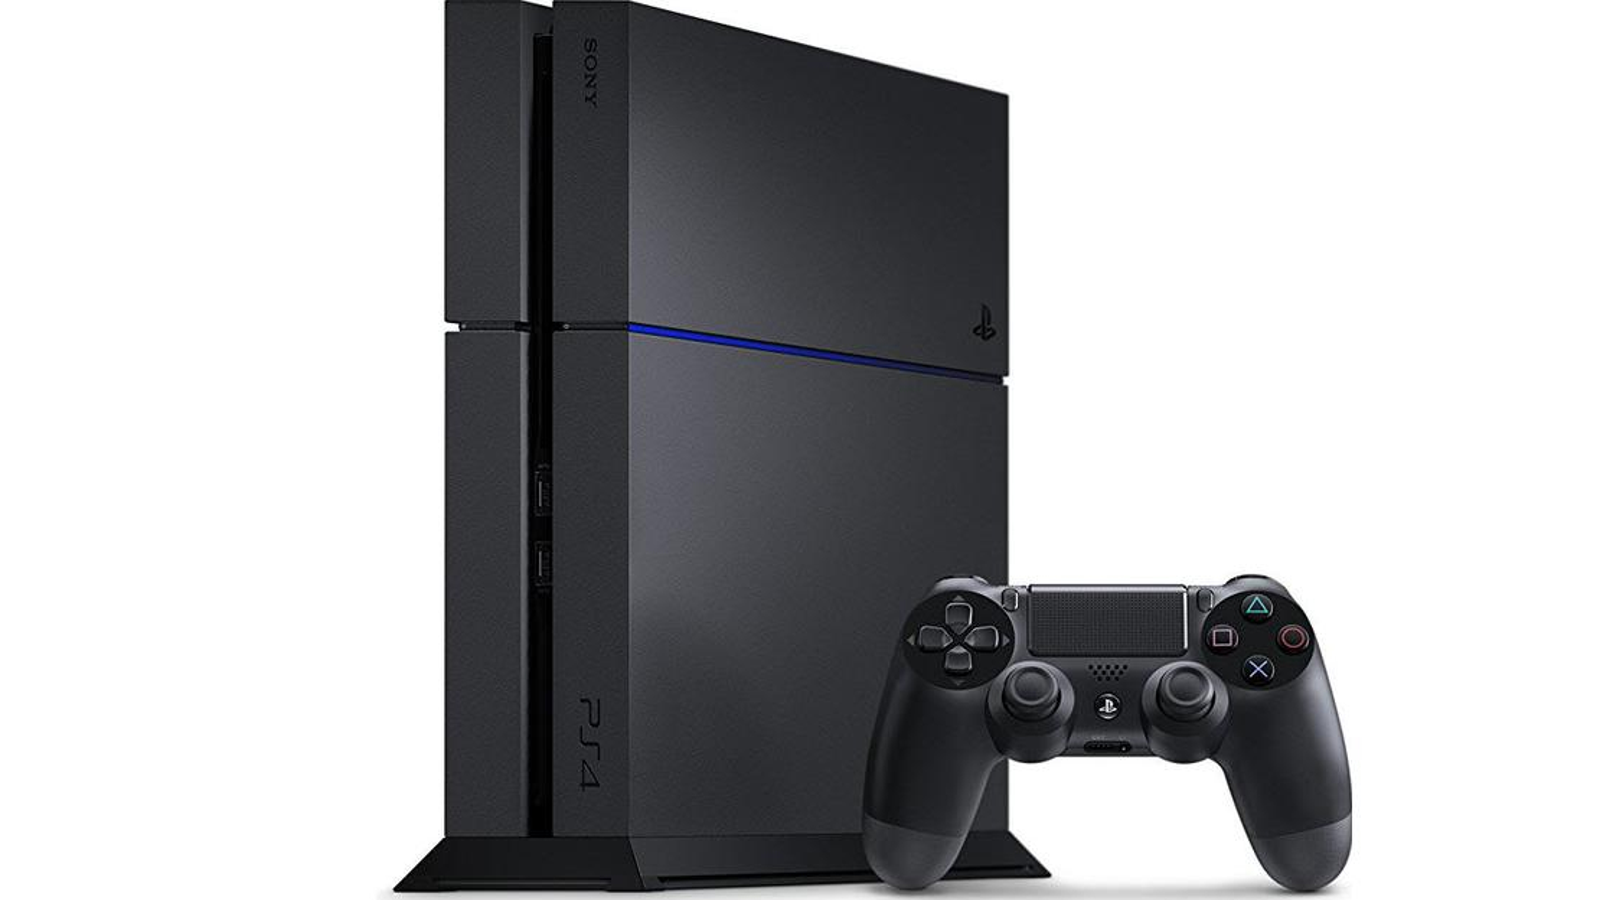 PlayStation 4 lifespan reportedly extended, as PS5 supply issues continue